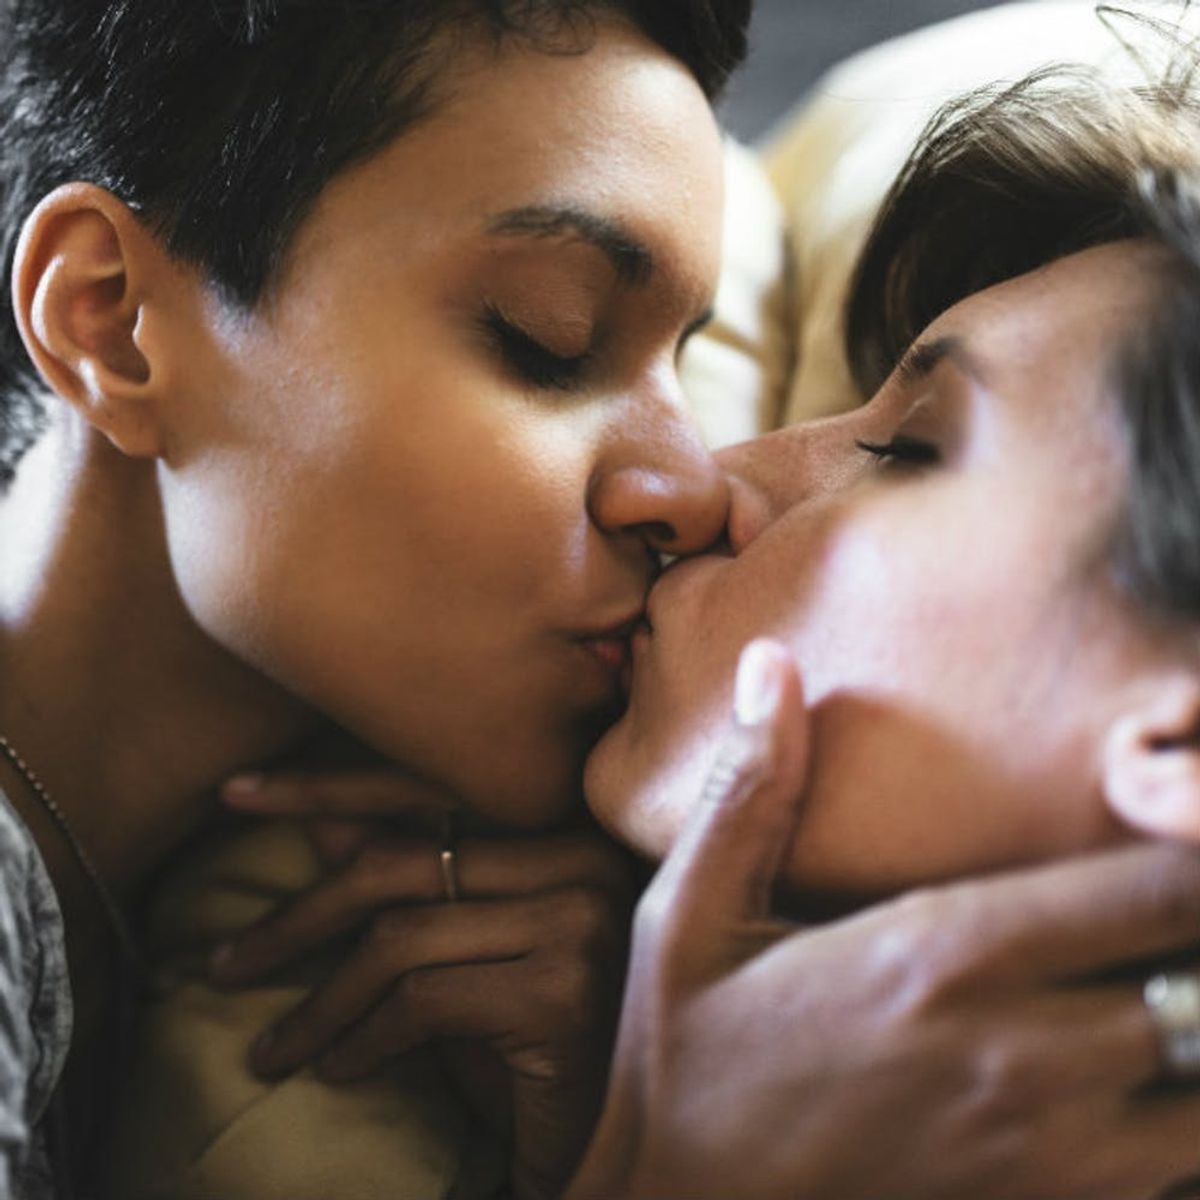 We Close Our Eyes When We Kiss Because of THIS Surprising Scientific Reason